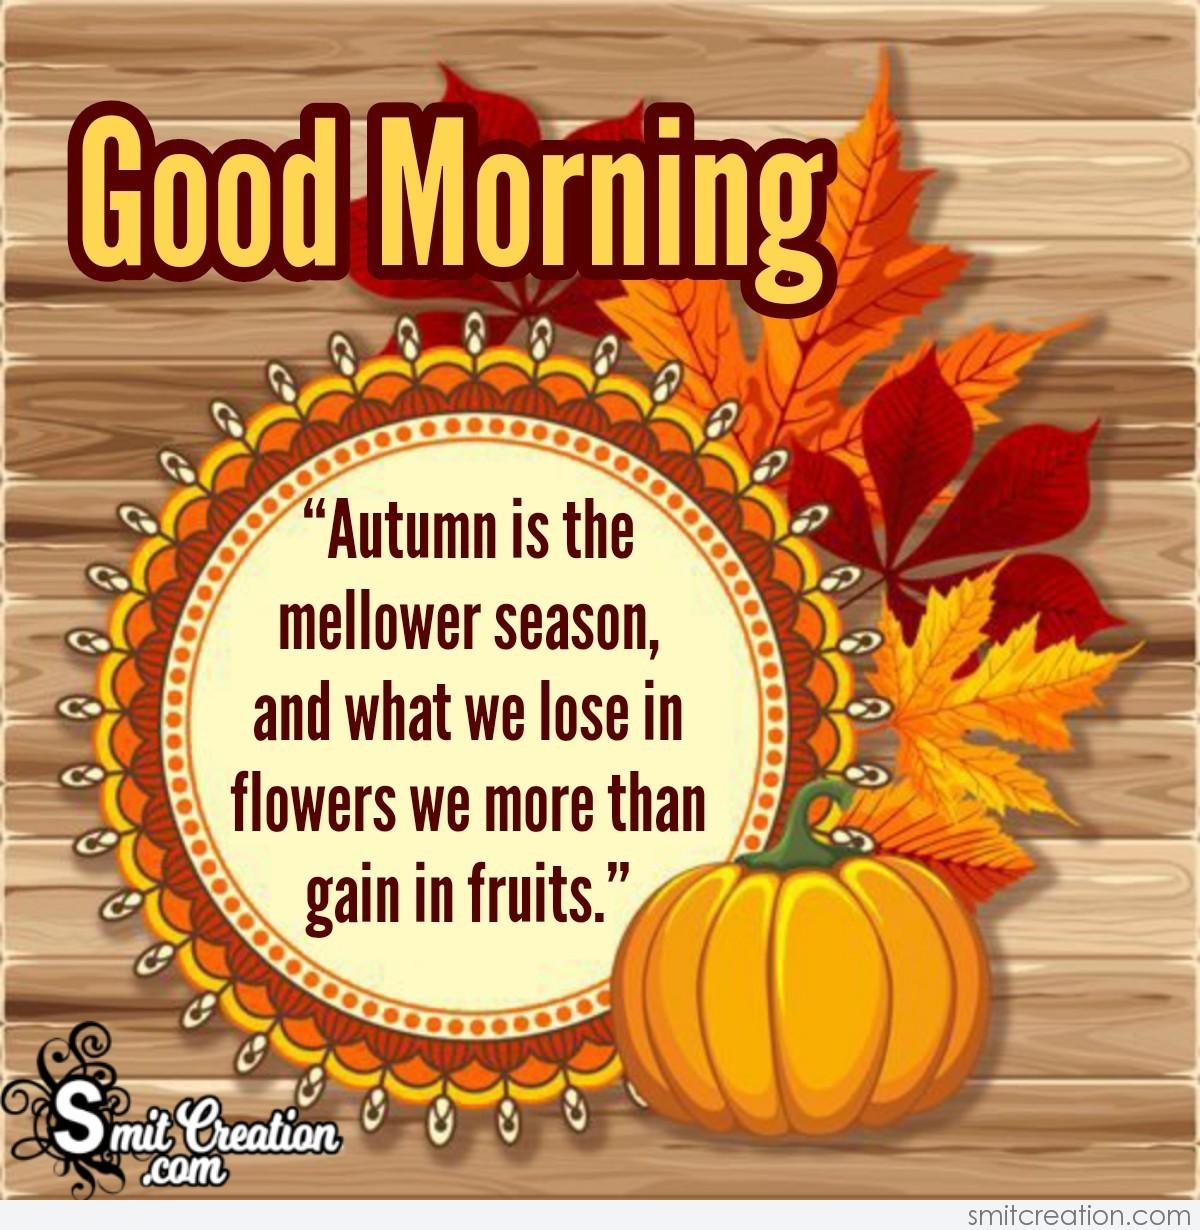 Good Morning Autumn Pictures and Graphics - SmitCreation.com